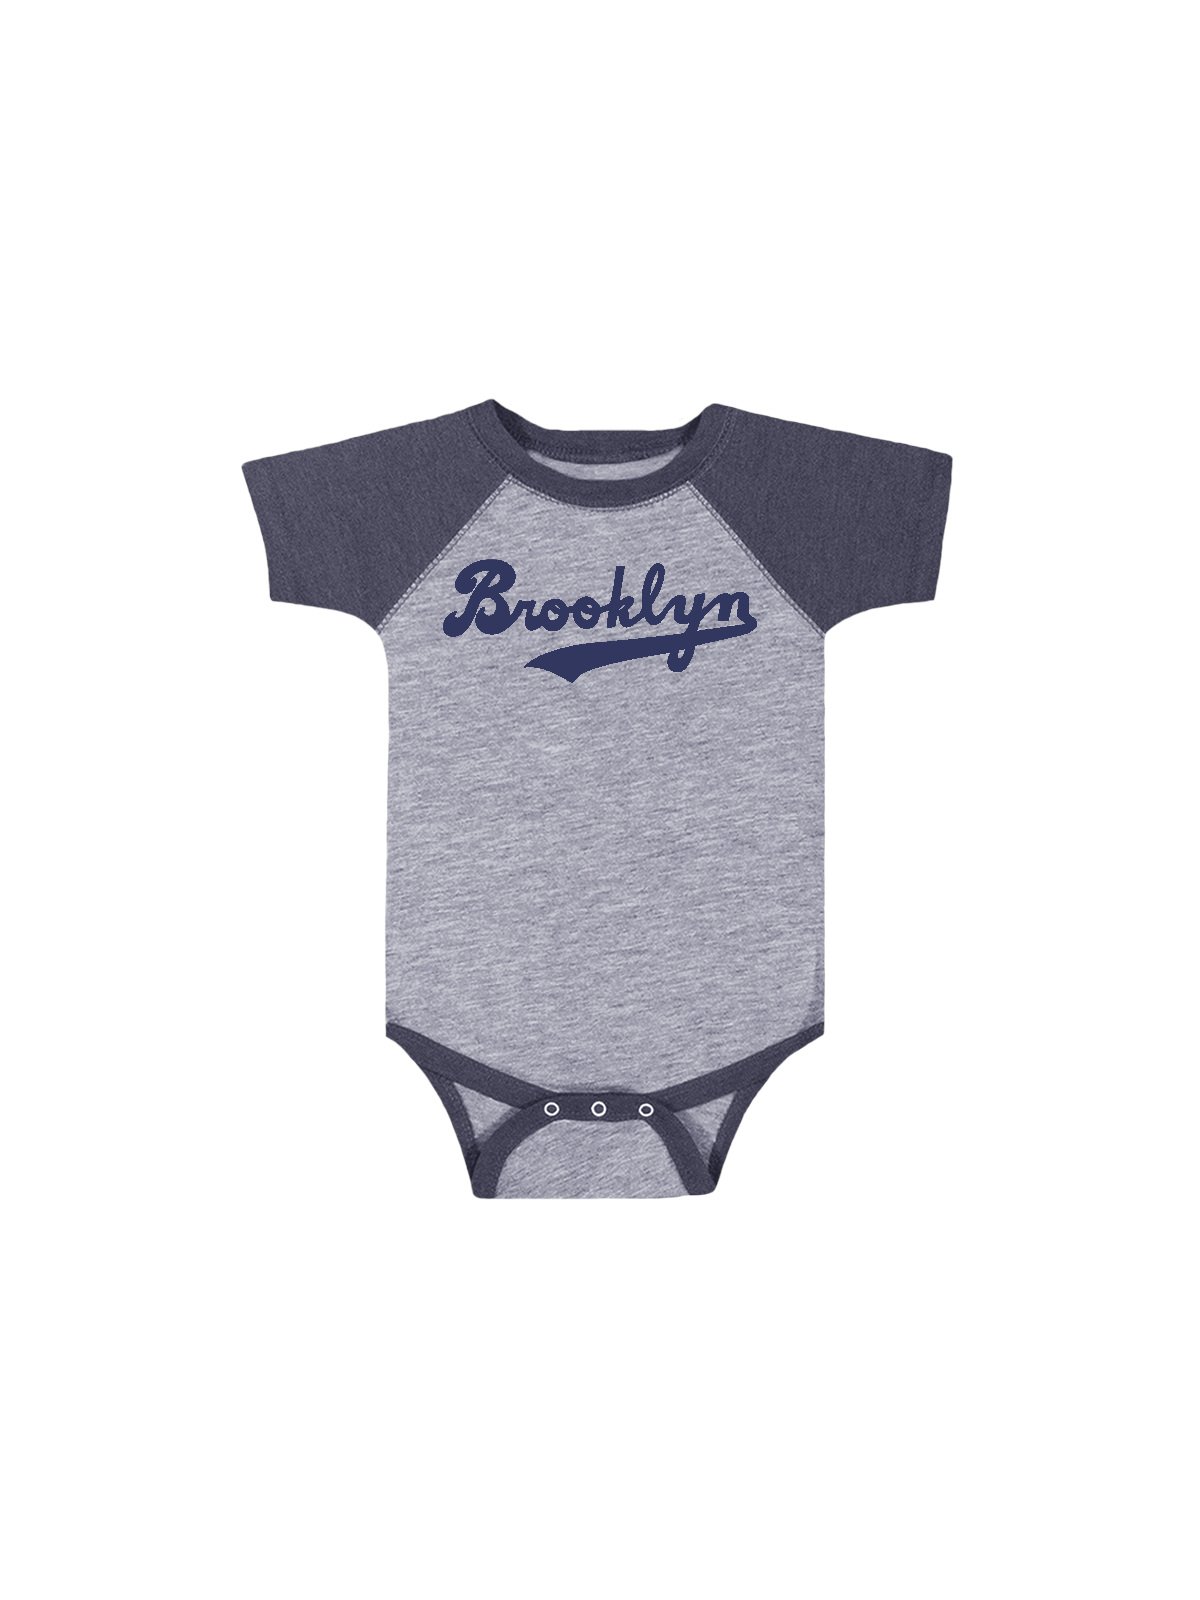 Brooklyn Baby Onesie Baby Clothes Baby Brooklyn Clothes Dodgers Clothes — brooklynite Designs.